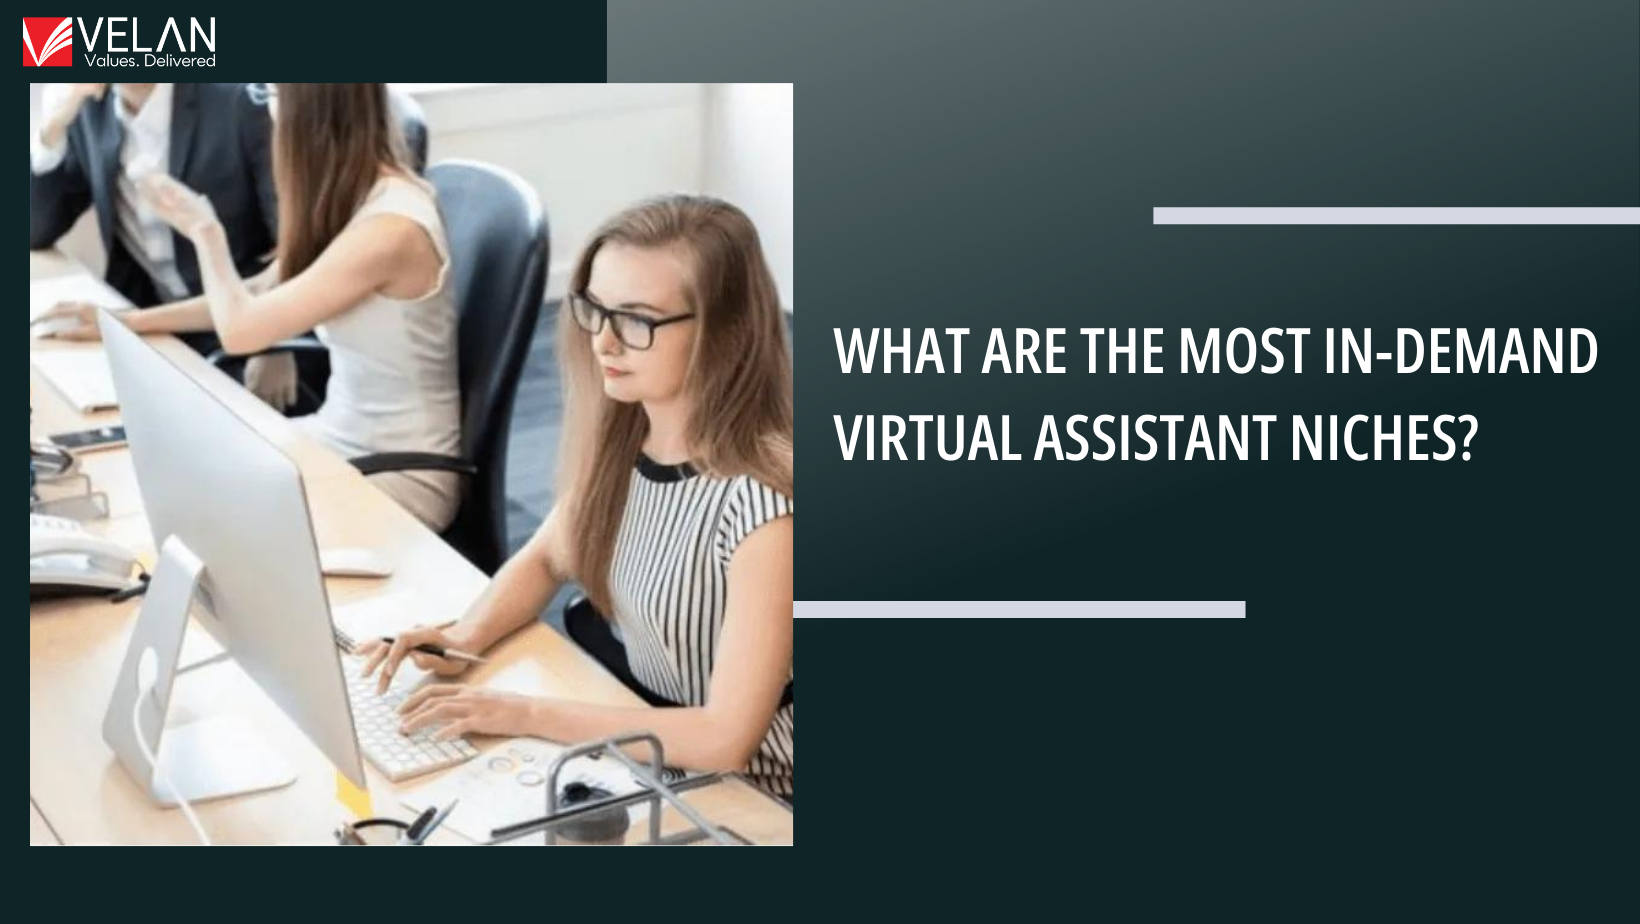 What Are the Most In-Demand Virtual Assistant Niches?